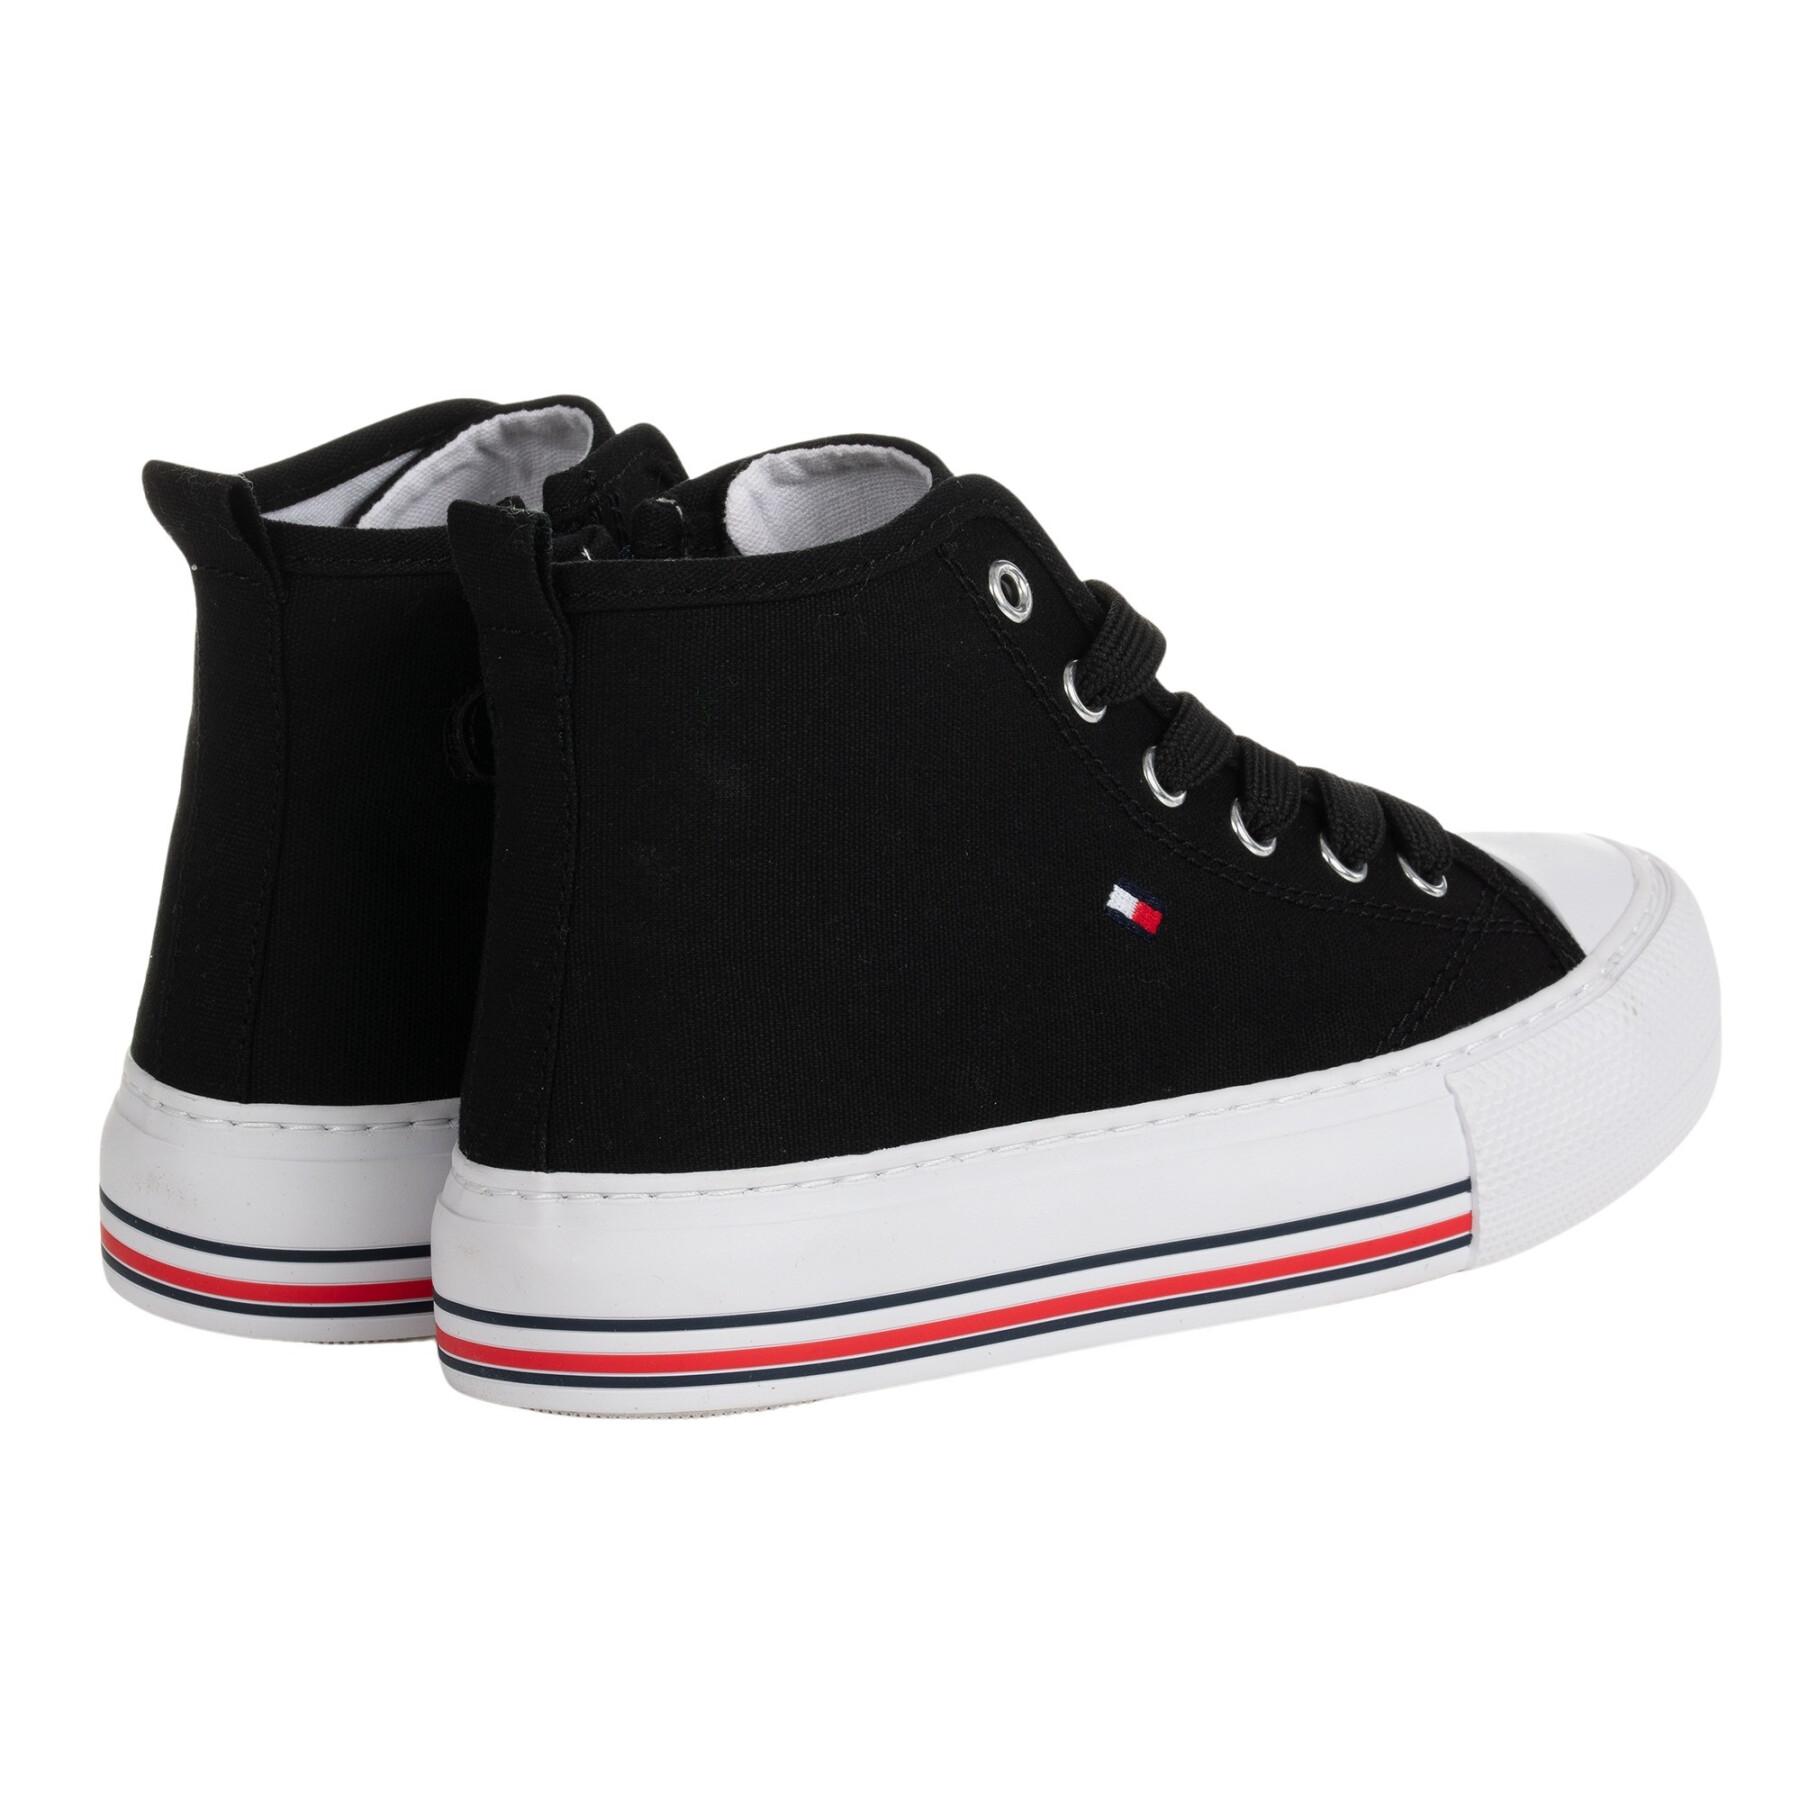 Girl's high top sneakers Tommy Hilfiger Black